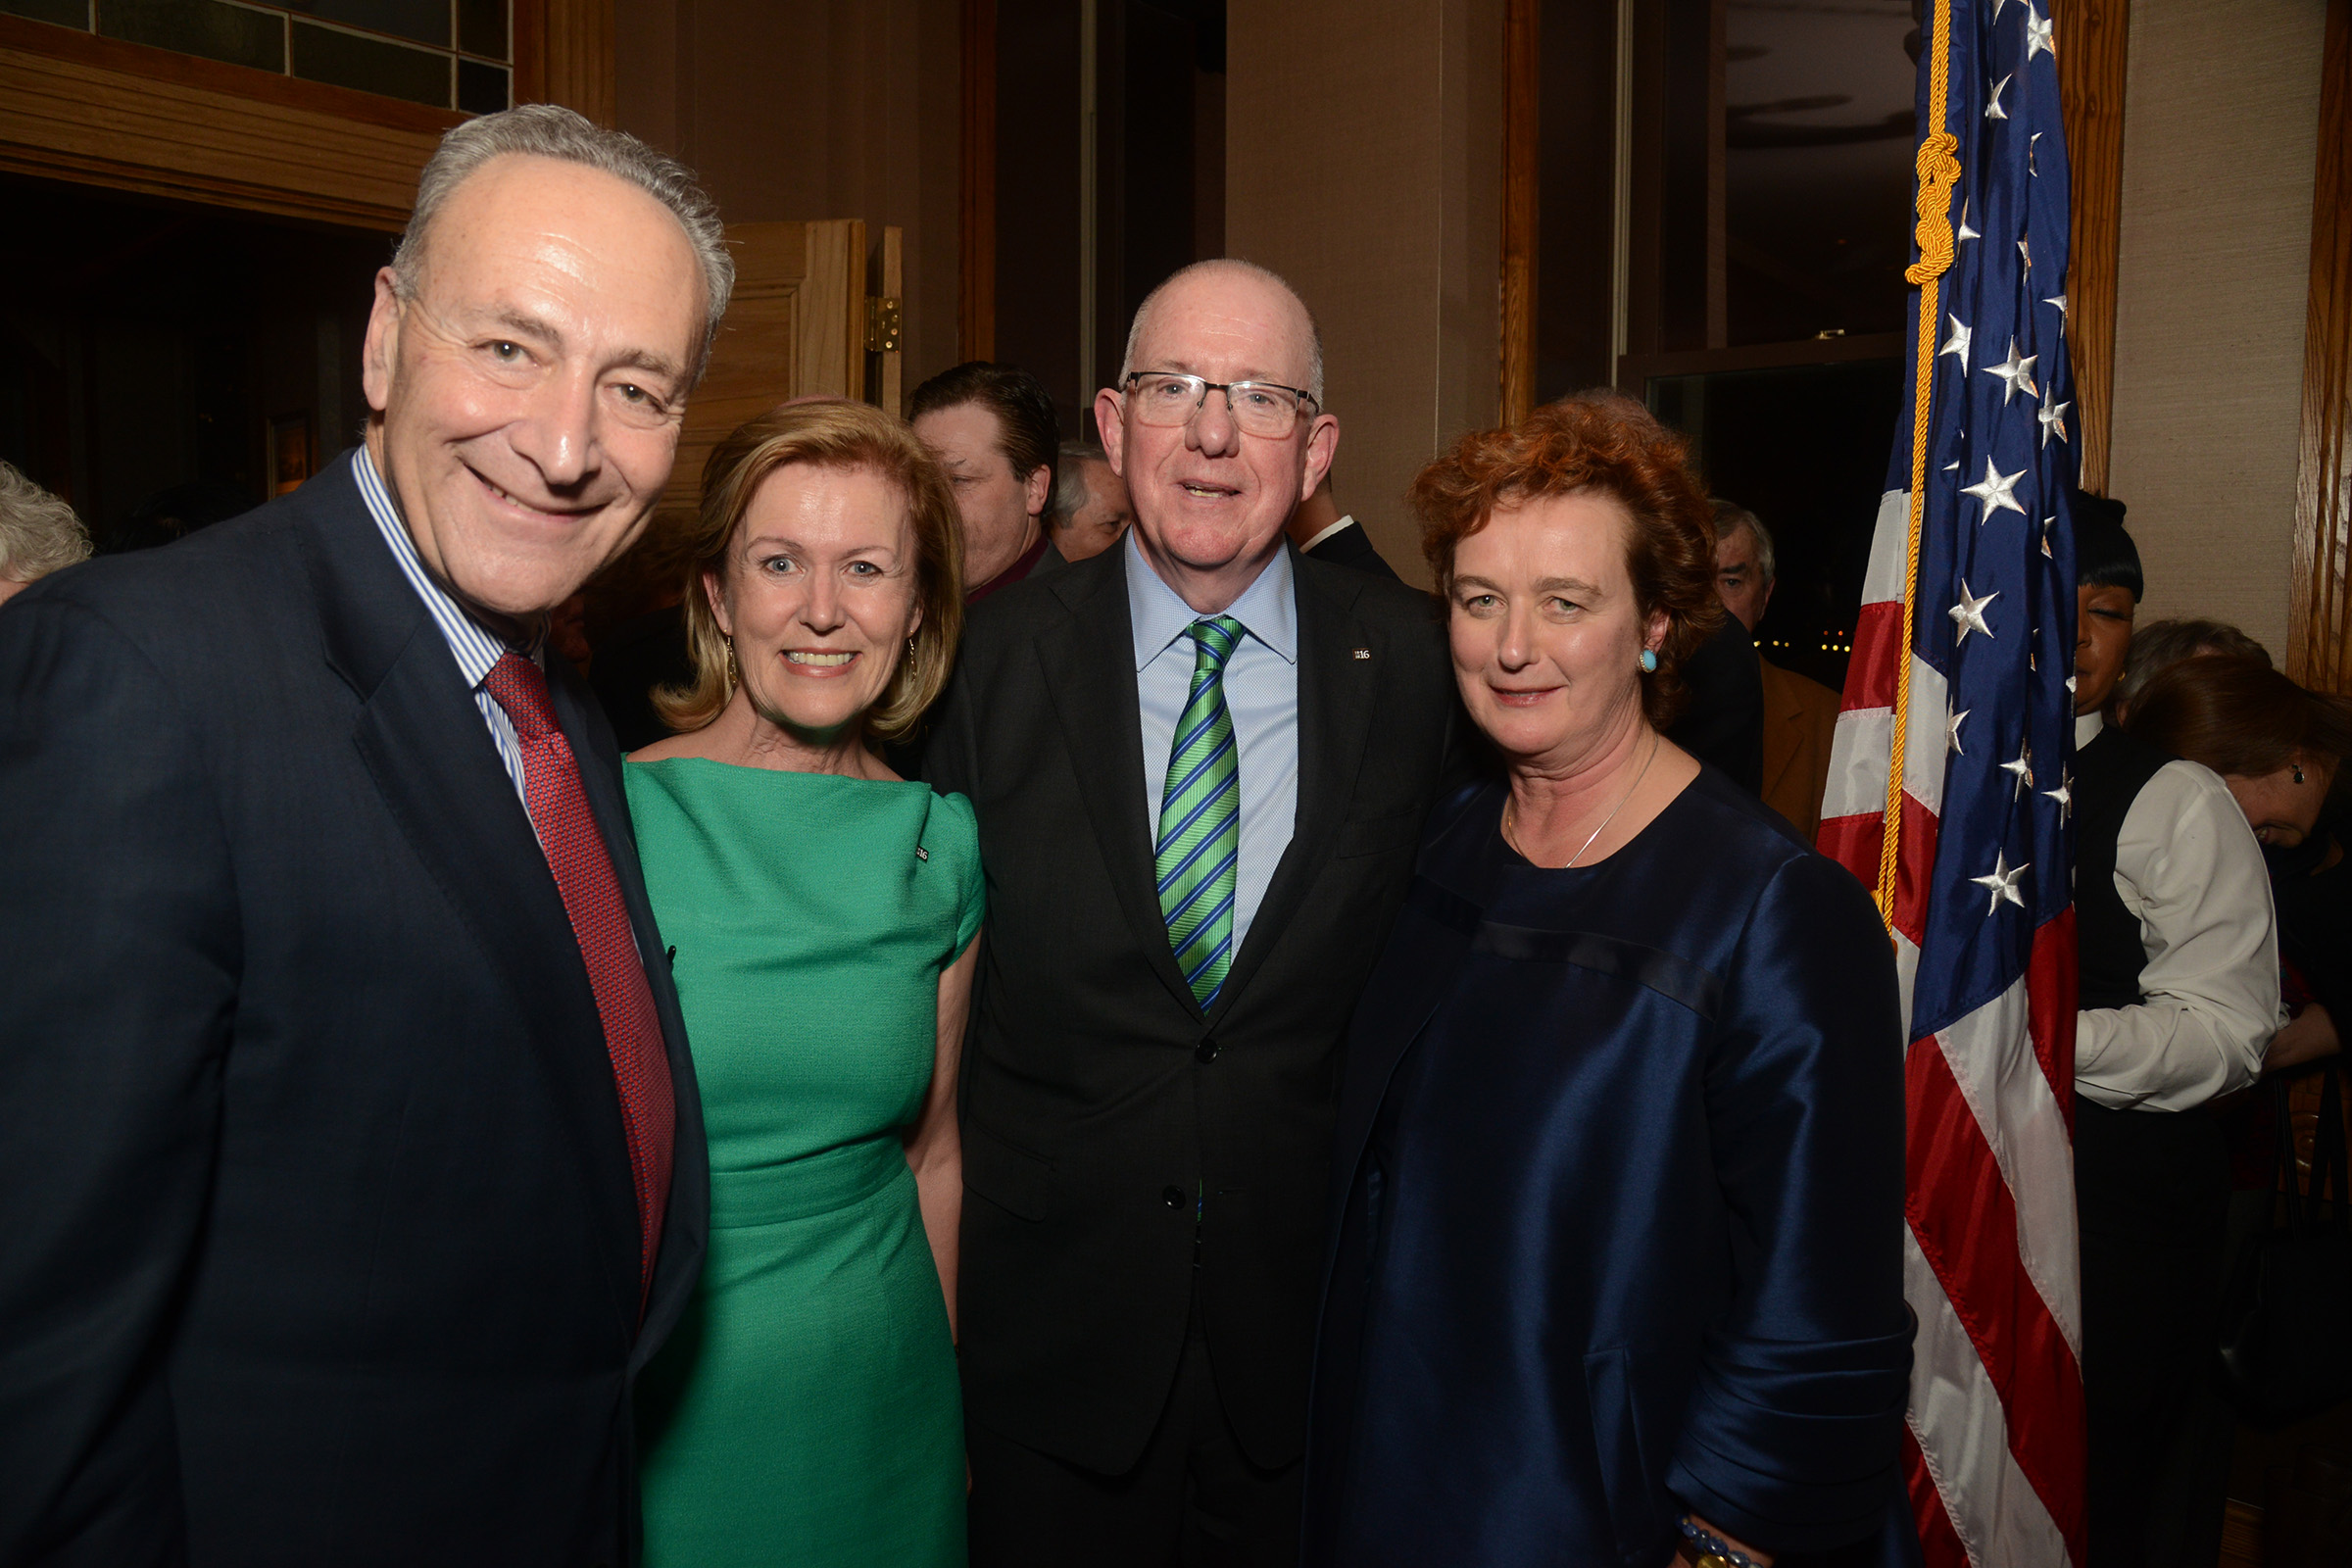 New York Senator Chuck Schumer with Ambassador Anne Anderson, Minister Charlie Flanagan and Consul General Barbara Jones at Pier A in January. (Photo: James Higgins)